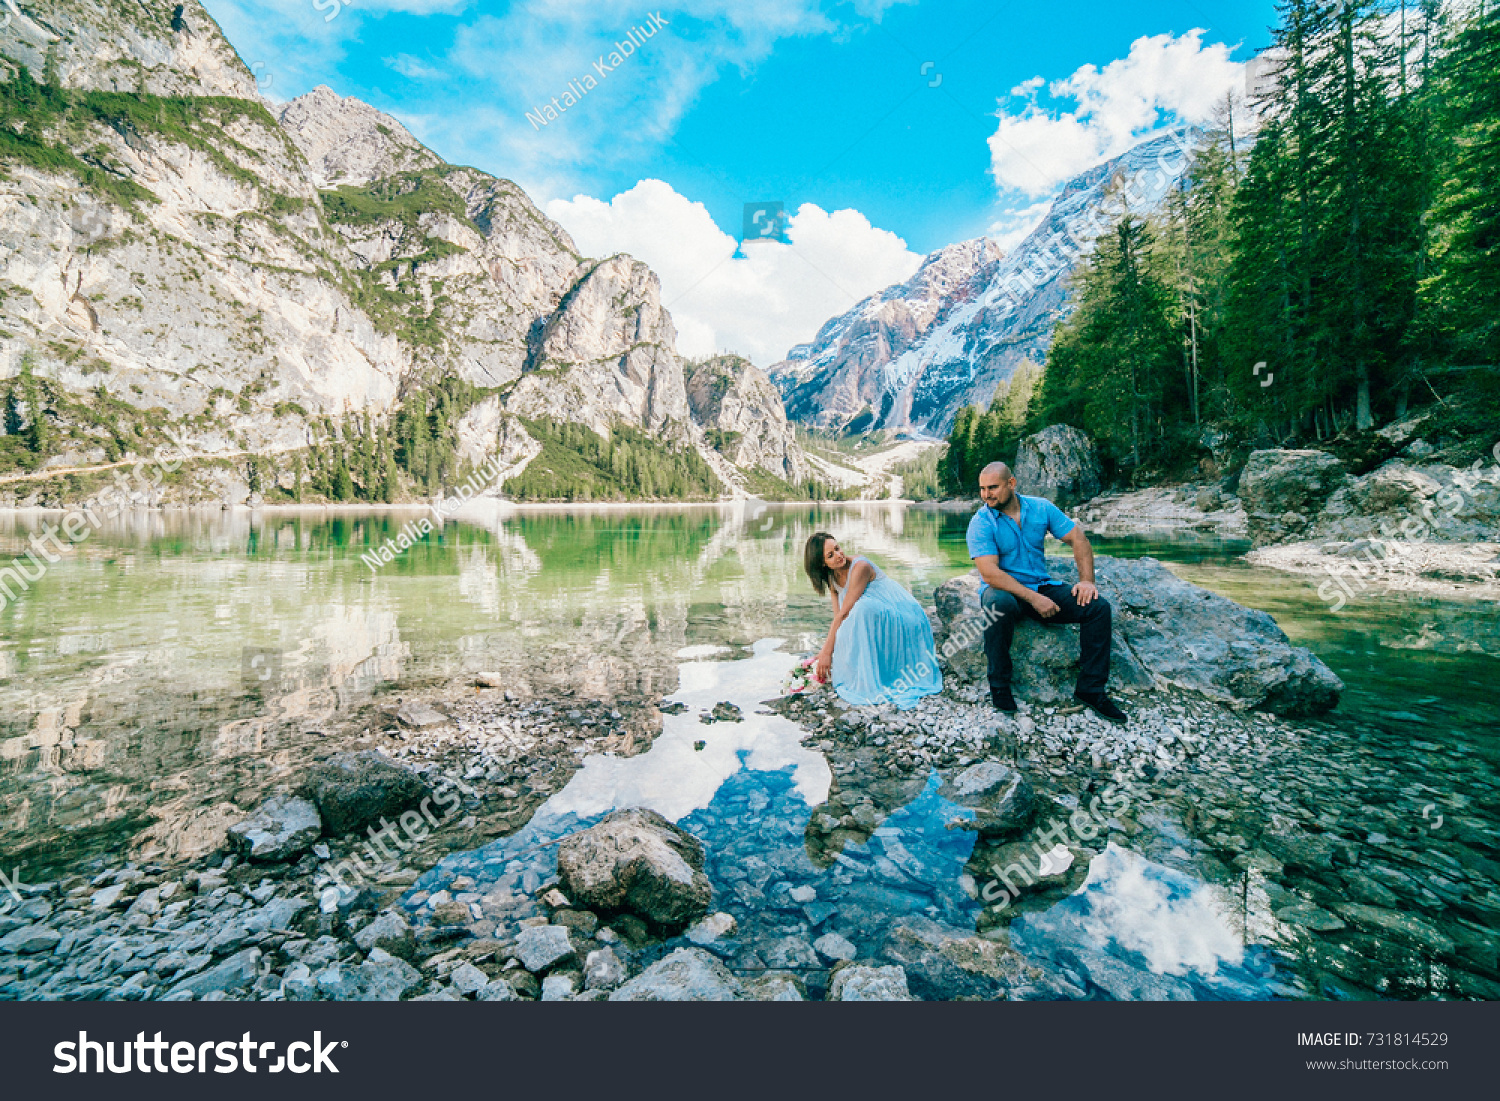 Young couple near lake lago di braies,Dolomite,Italy hold the hand stand at the stone at lake. #731814529